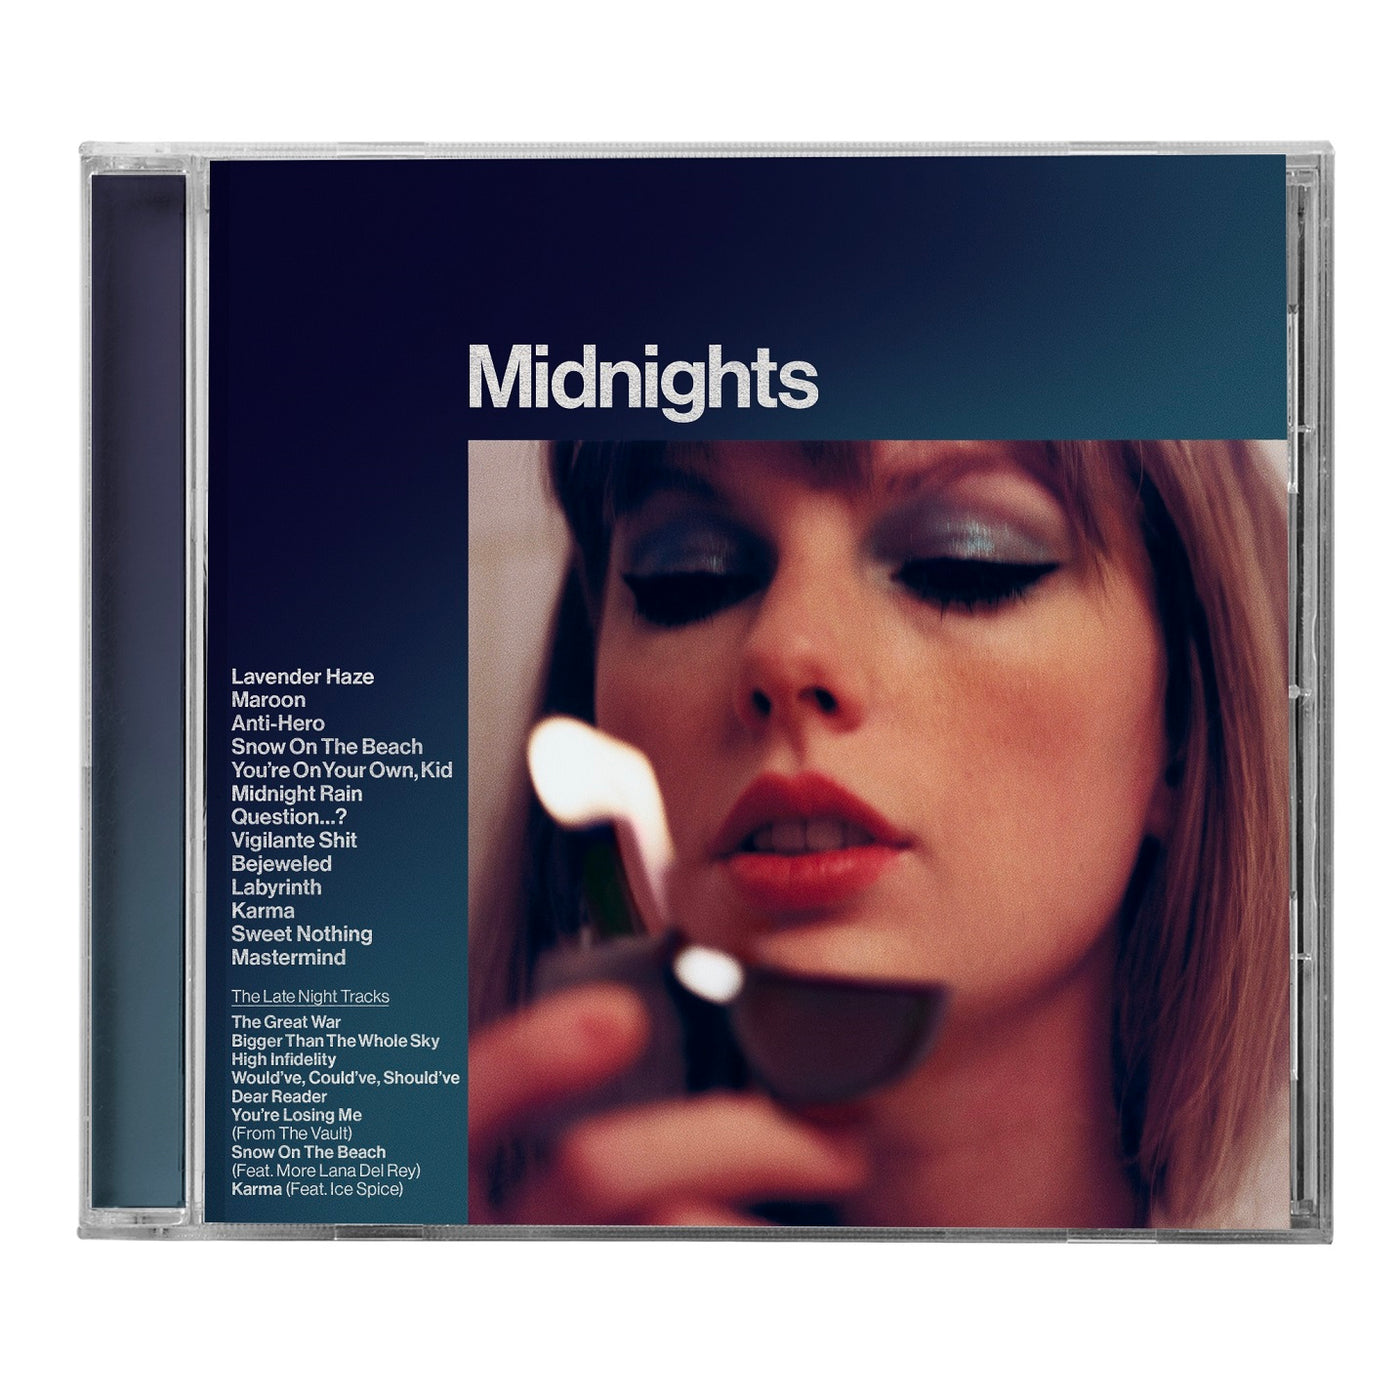 Taylor Swift: Midnights - The Late Night Edition CD